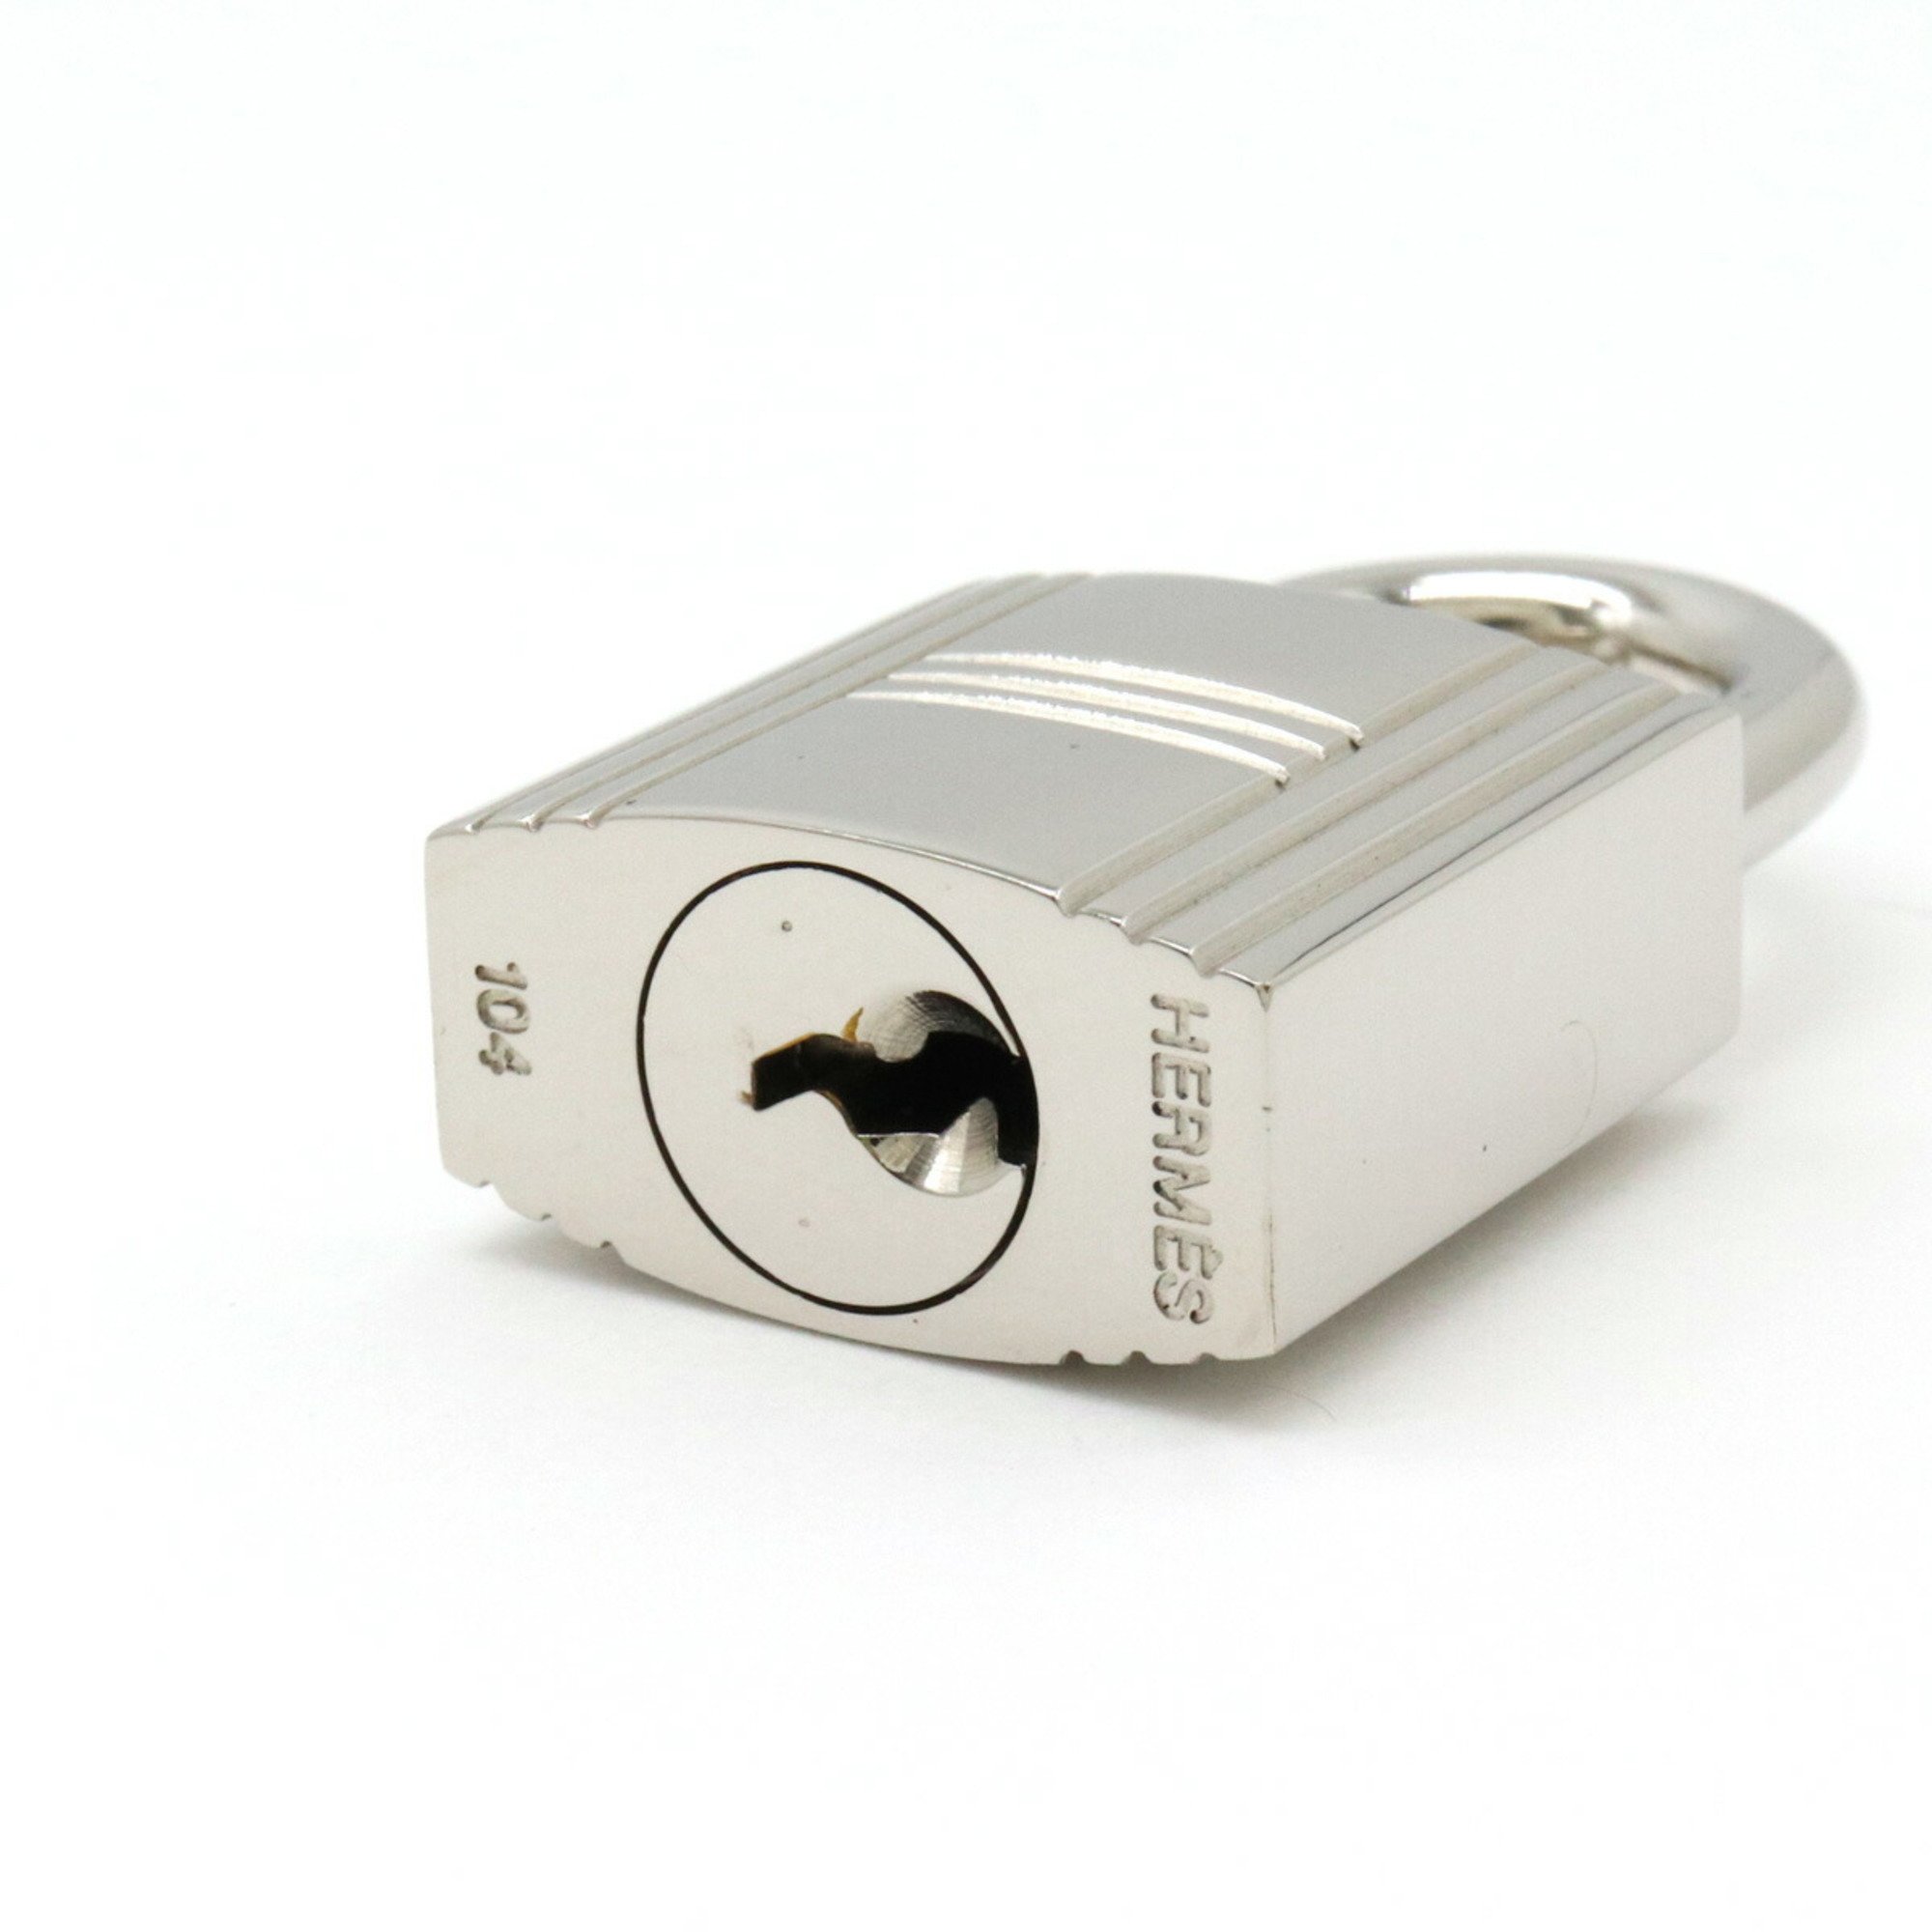 HERMES Padlock No.104 with Key Silver Color